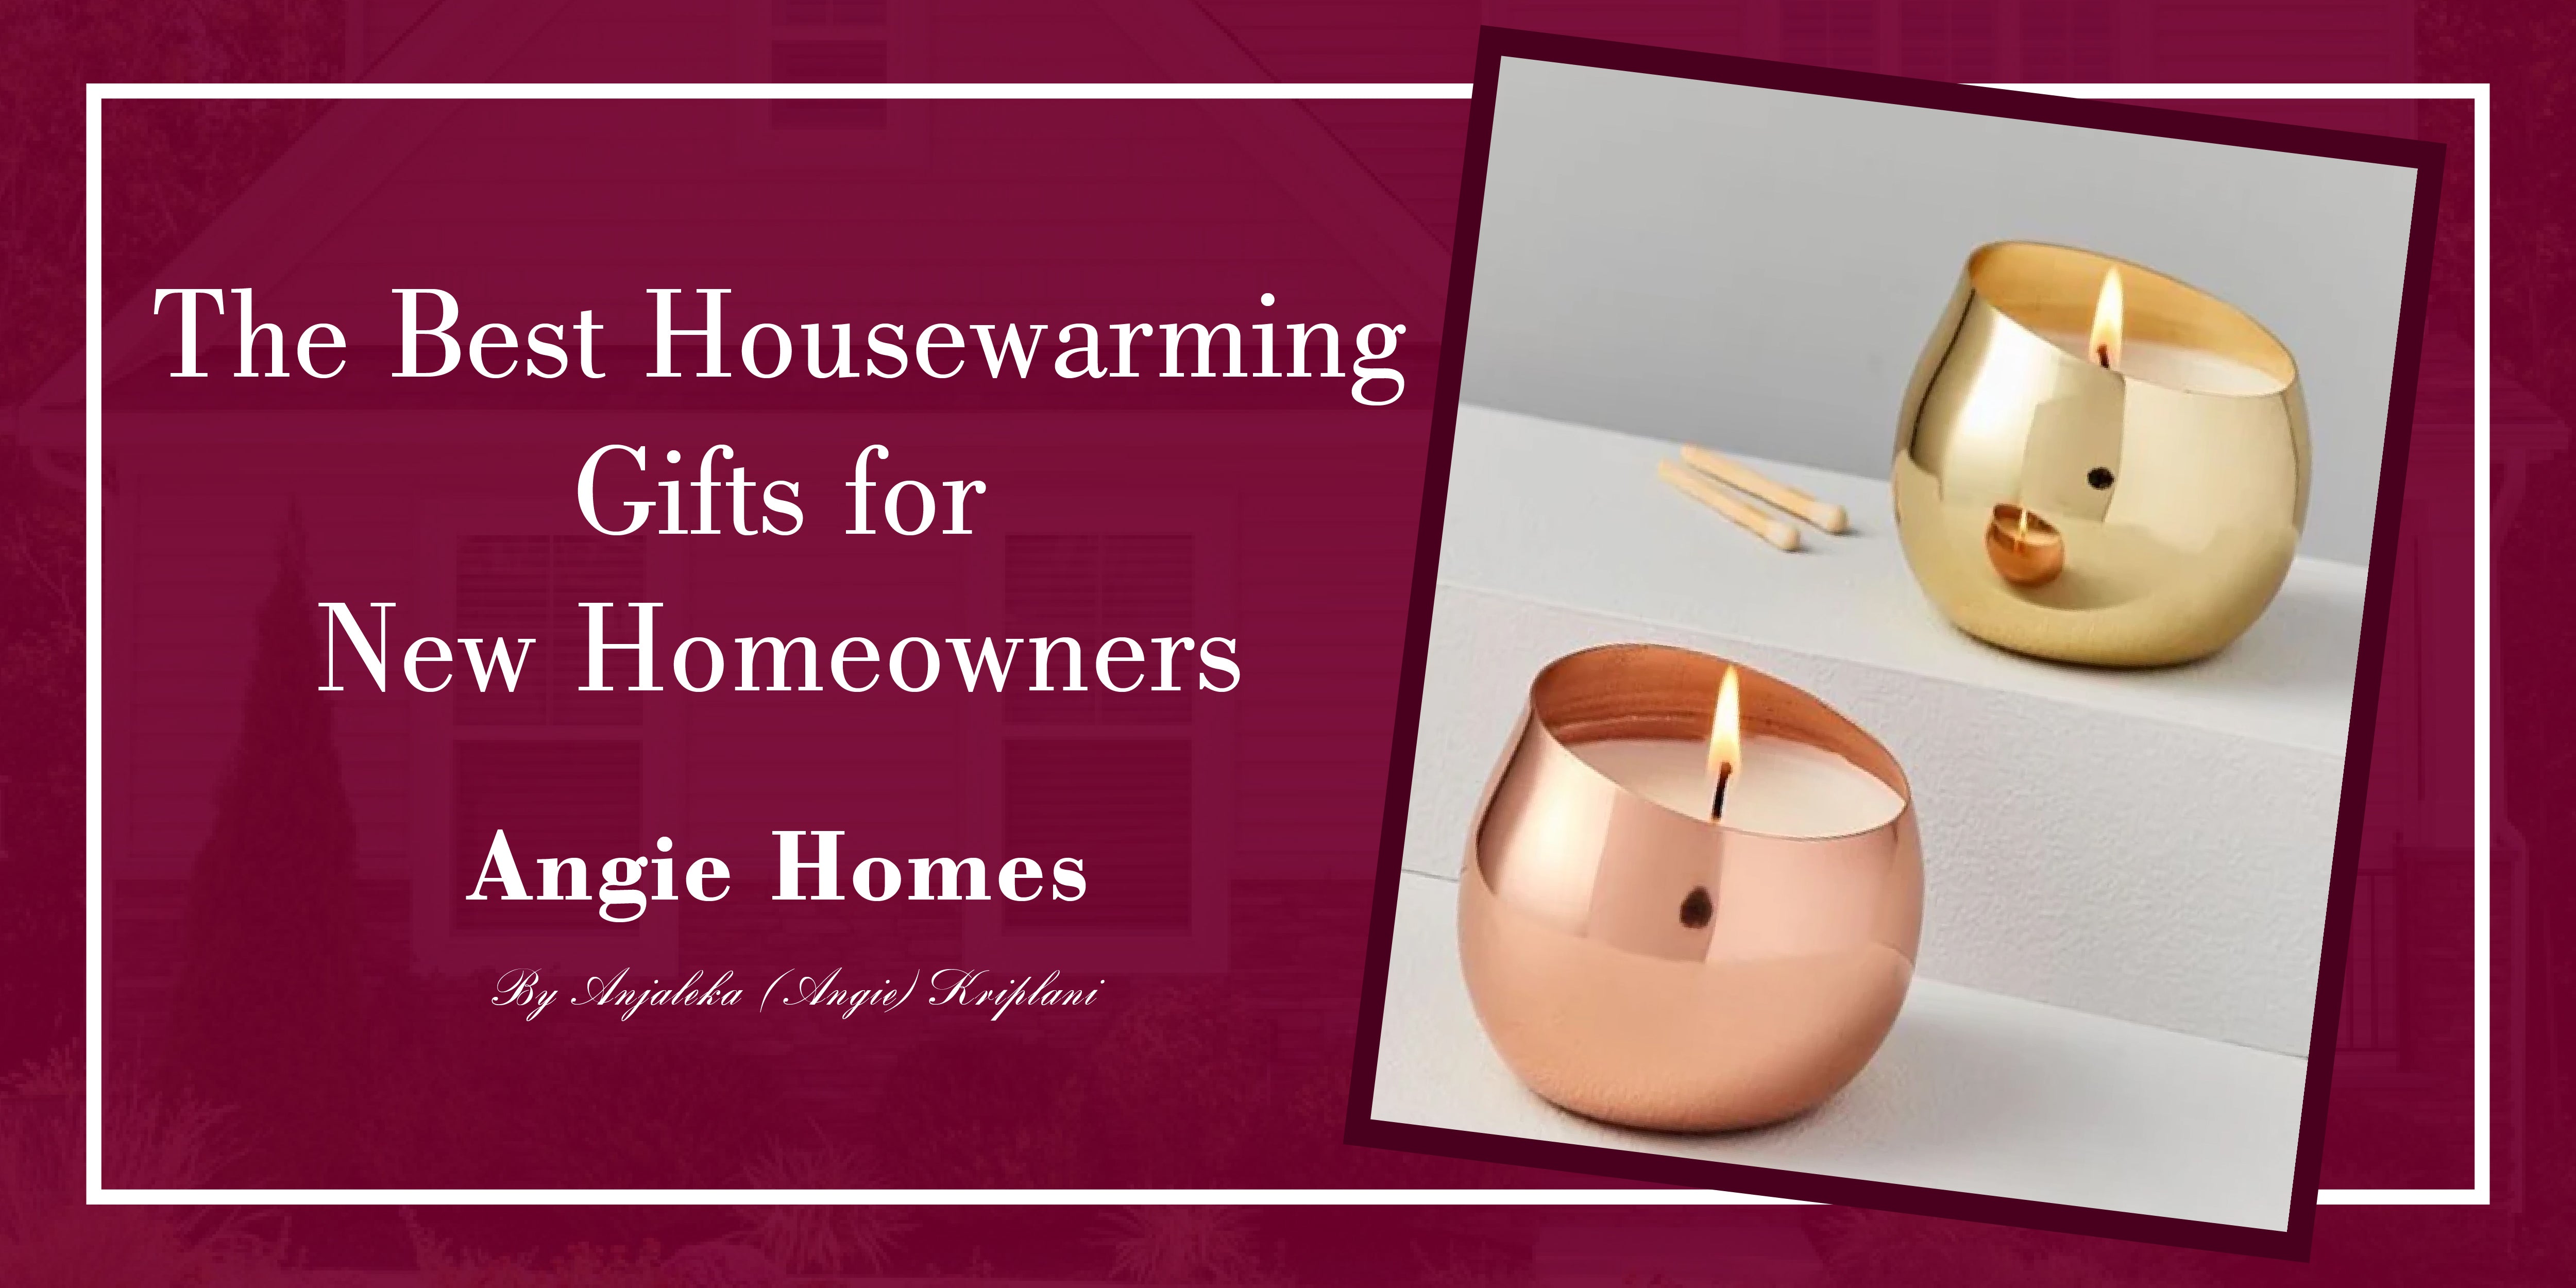 The Best Housewarming Gifts for New Homeowners